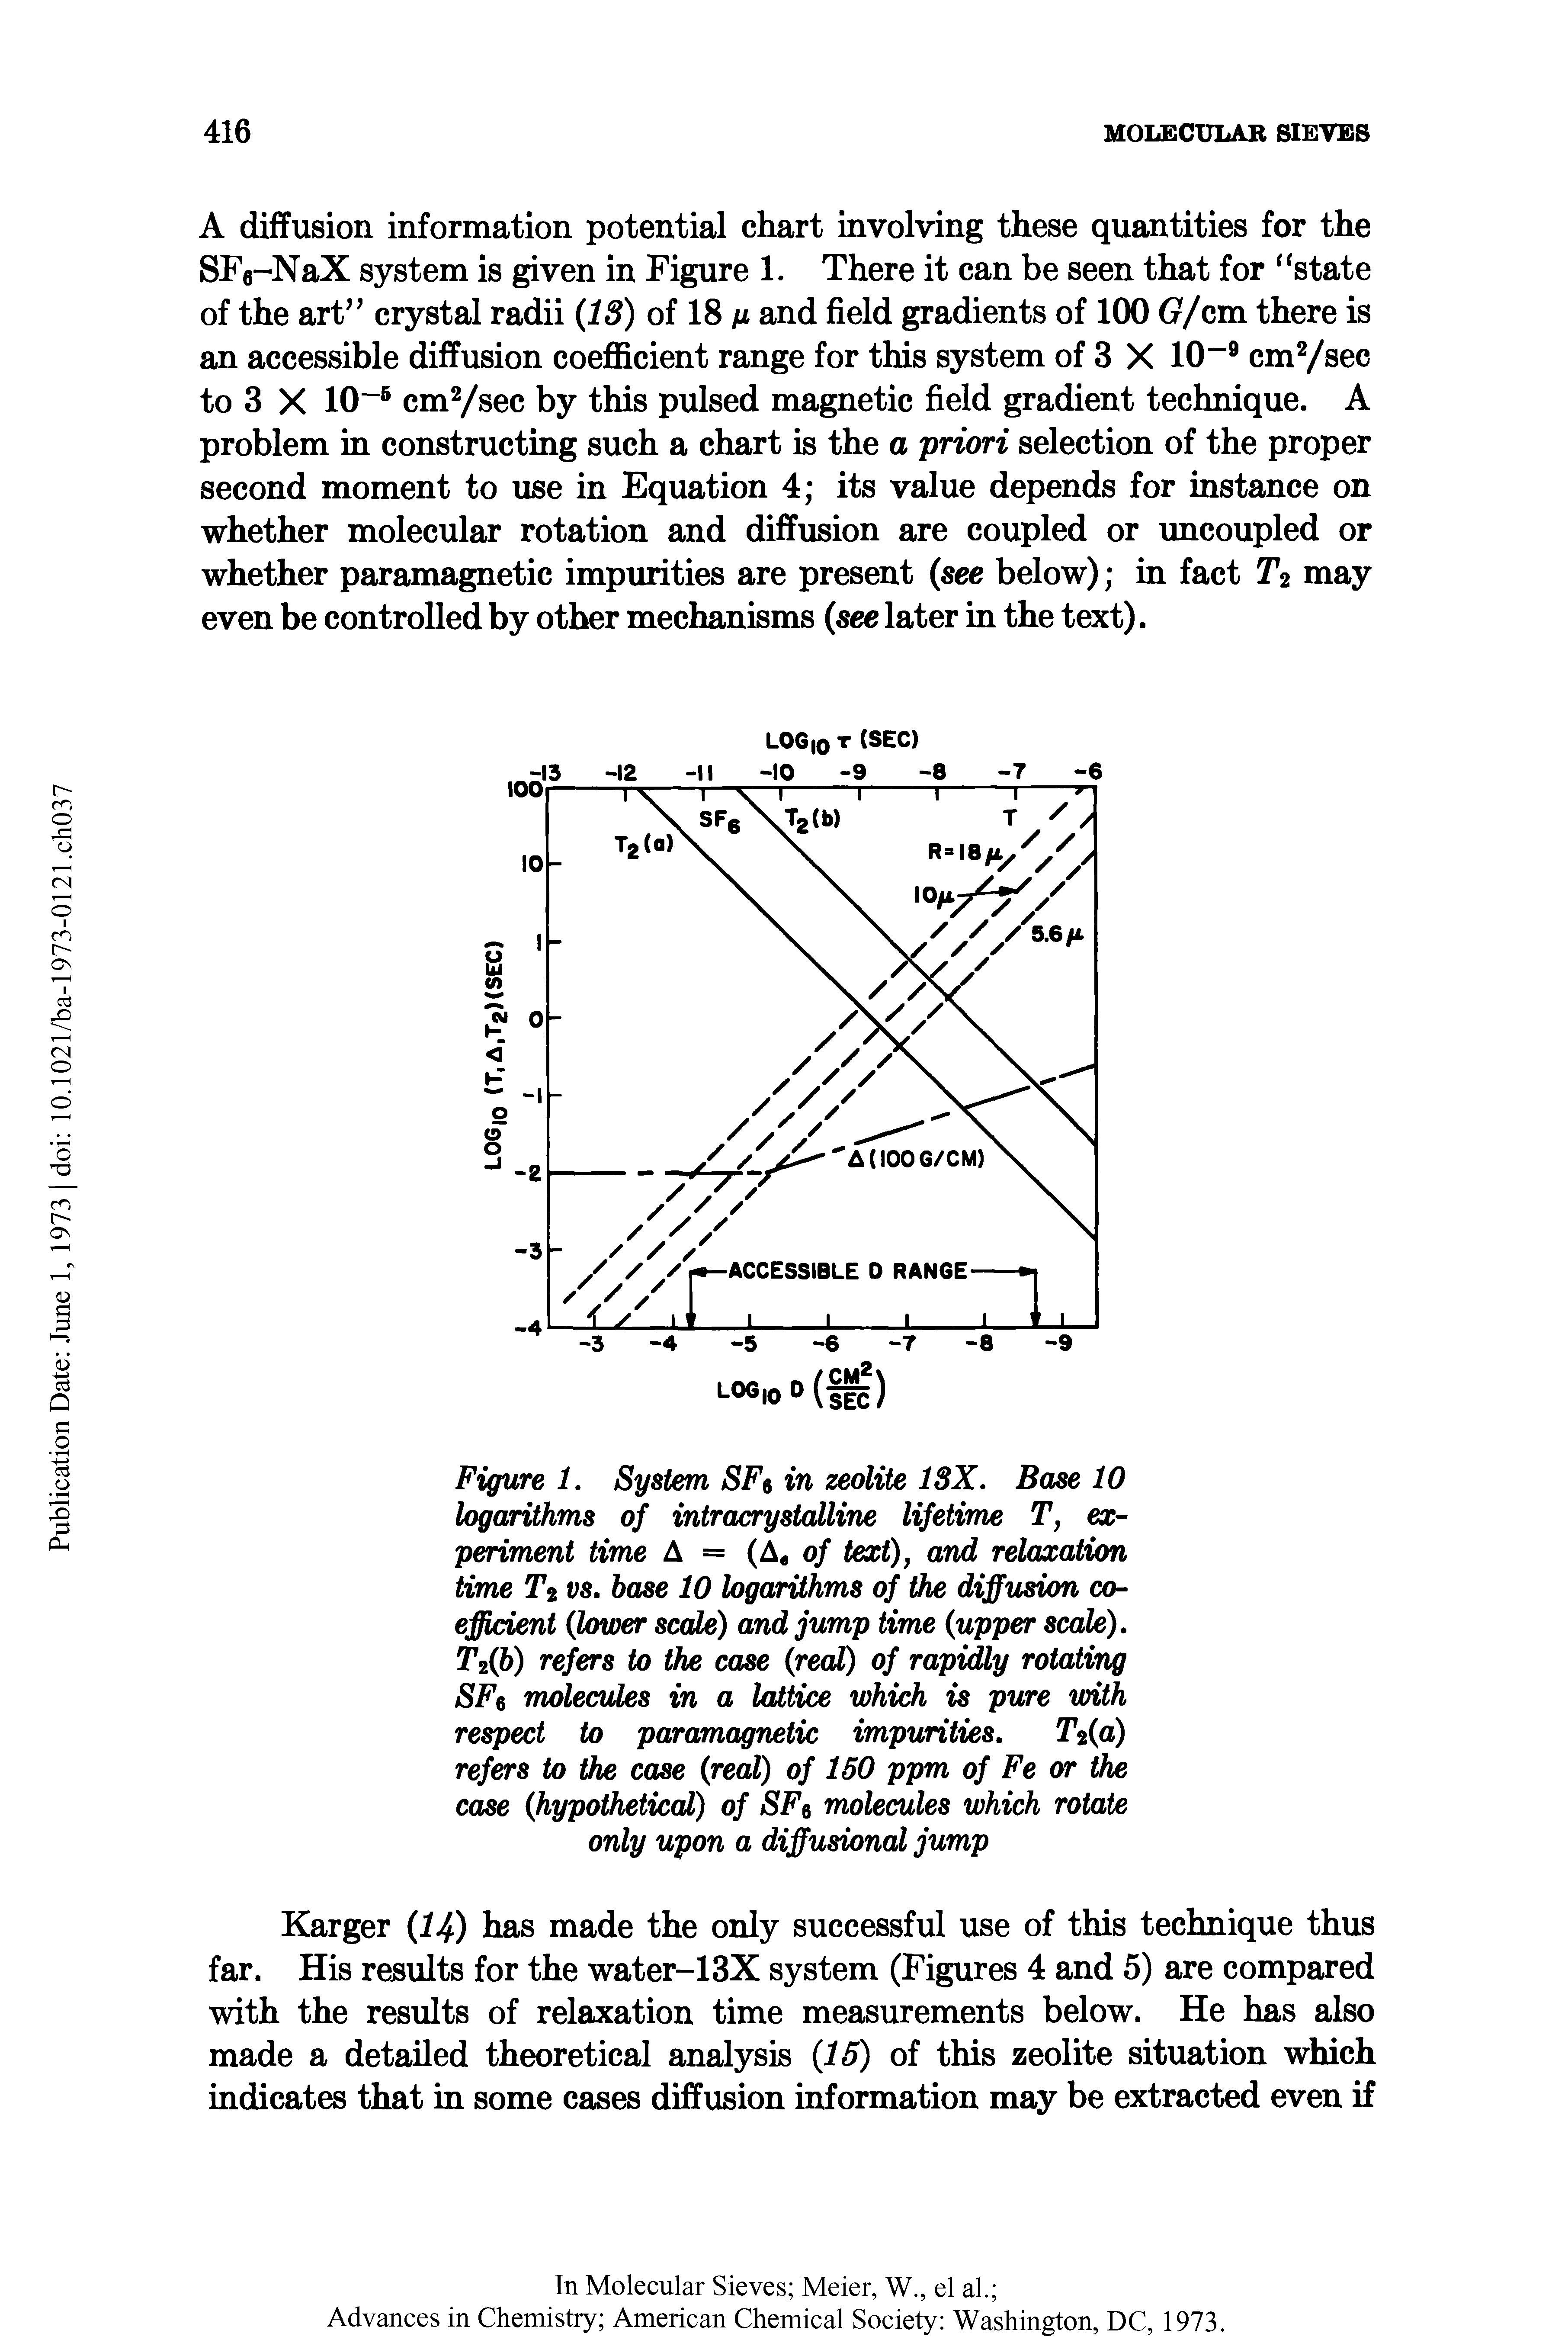 Figure 1. System SF6 in zeolite 13X. Base 10 logarithms of intraerystalline lifetime T, experiment time A = (A of text), and relaxation time T2 vs. base 10 logarithms of the diffusion coefficient (lower scale) and jump time (upper scale).